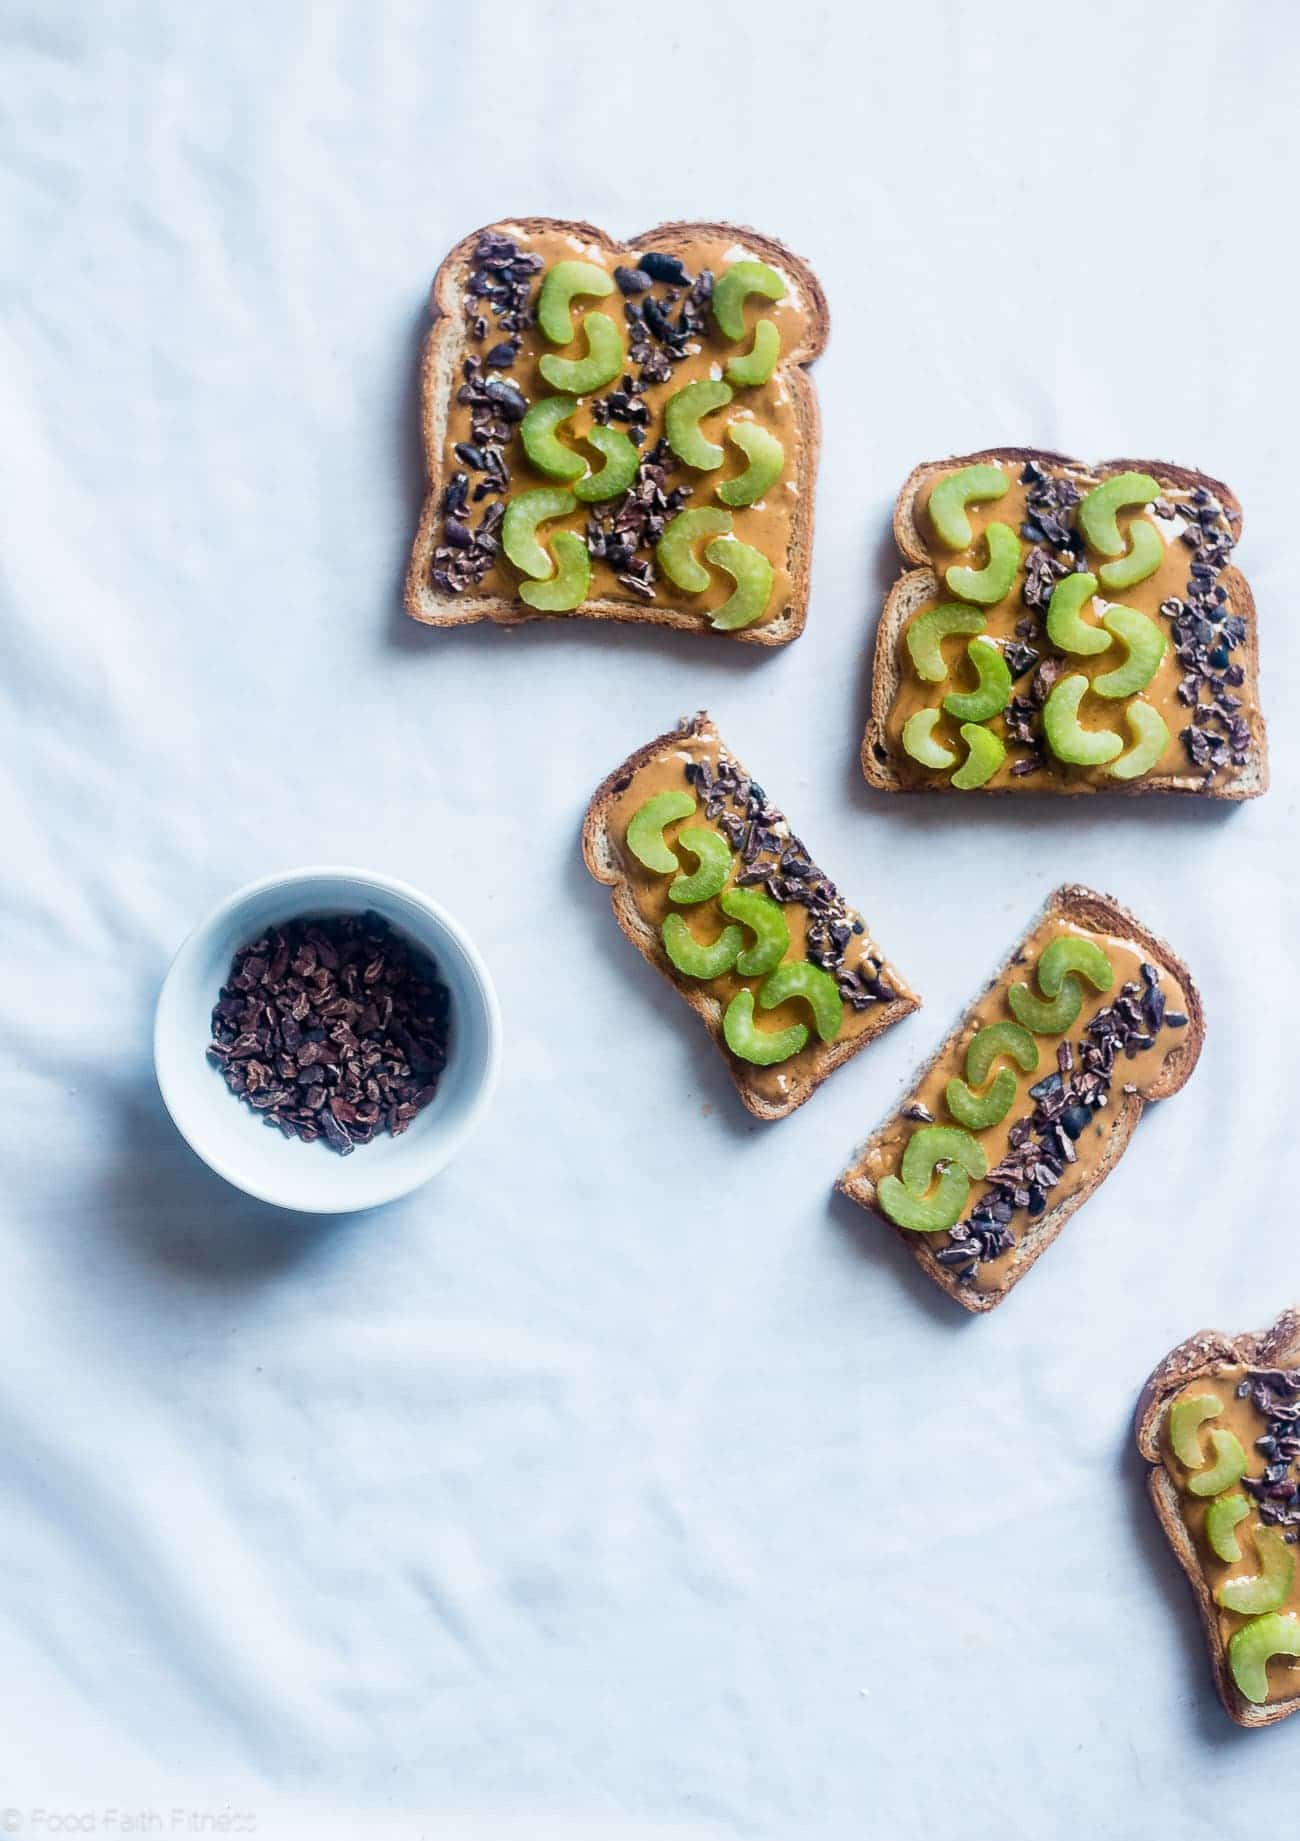 5 Vegan Dessert Breakfast Toasts - Want to eat cookie dough, cookies n' cream, sweet potato pie or an almond joy for breakfast? These healthy, gluten free toasts let you have dessert for breakfast, and you can prep the toppings ahead! | FoodFaithFitness.com | @FoodFaithFit